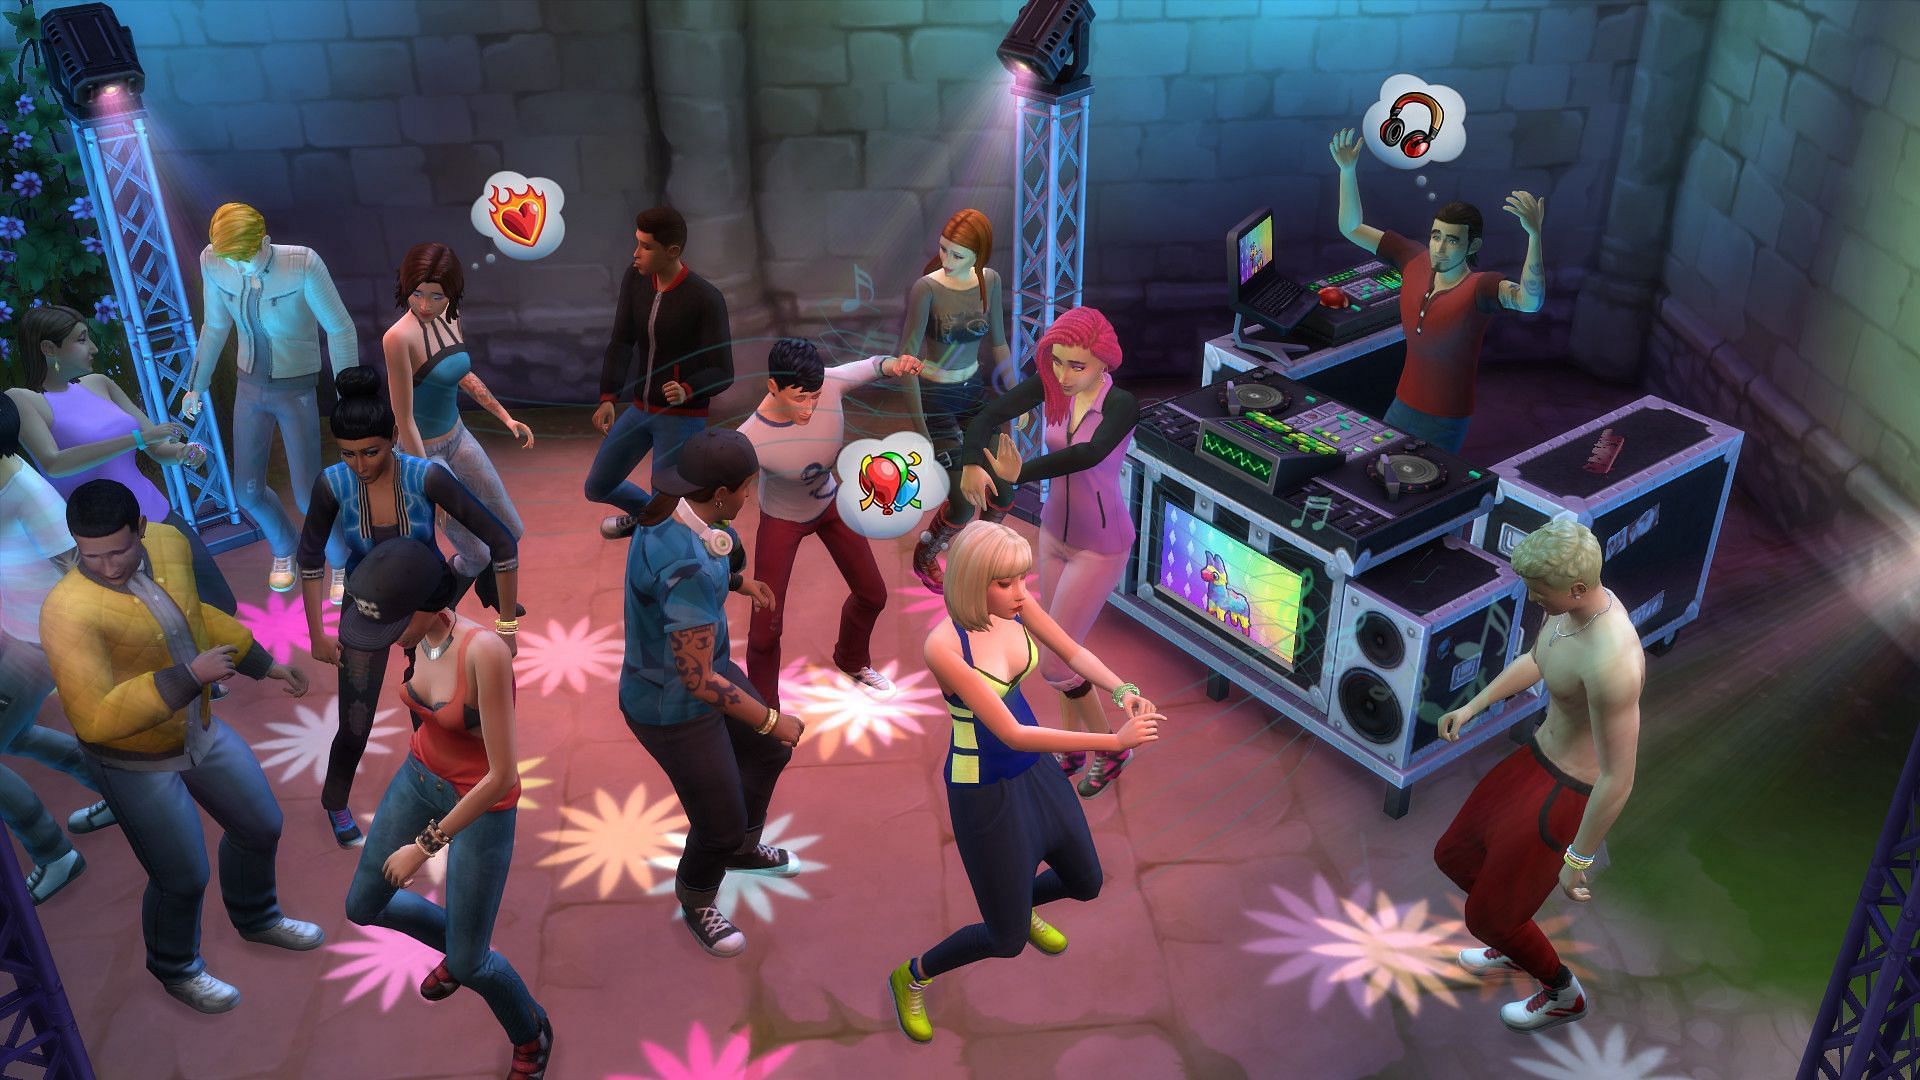 Get Together has the best clubs among all Sims 4 Expansion Packs (Image via Steam)